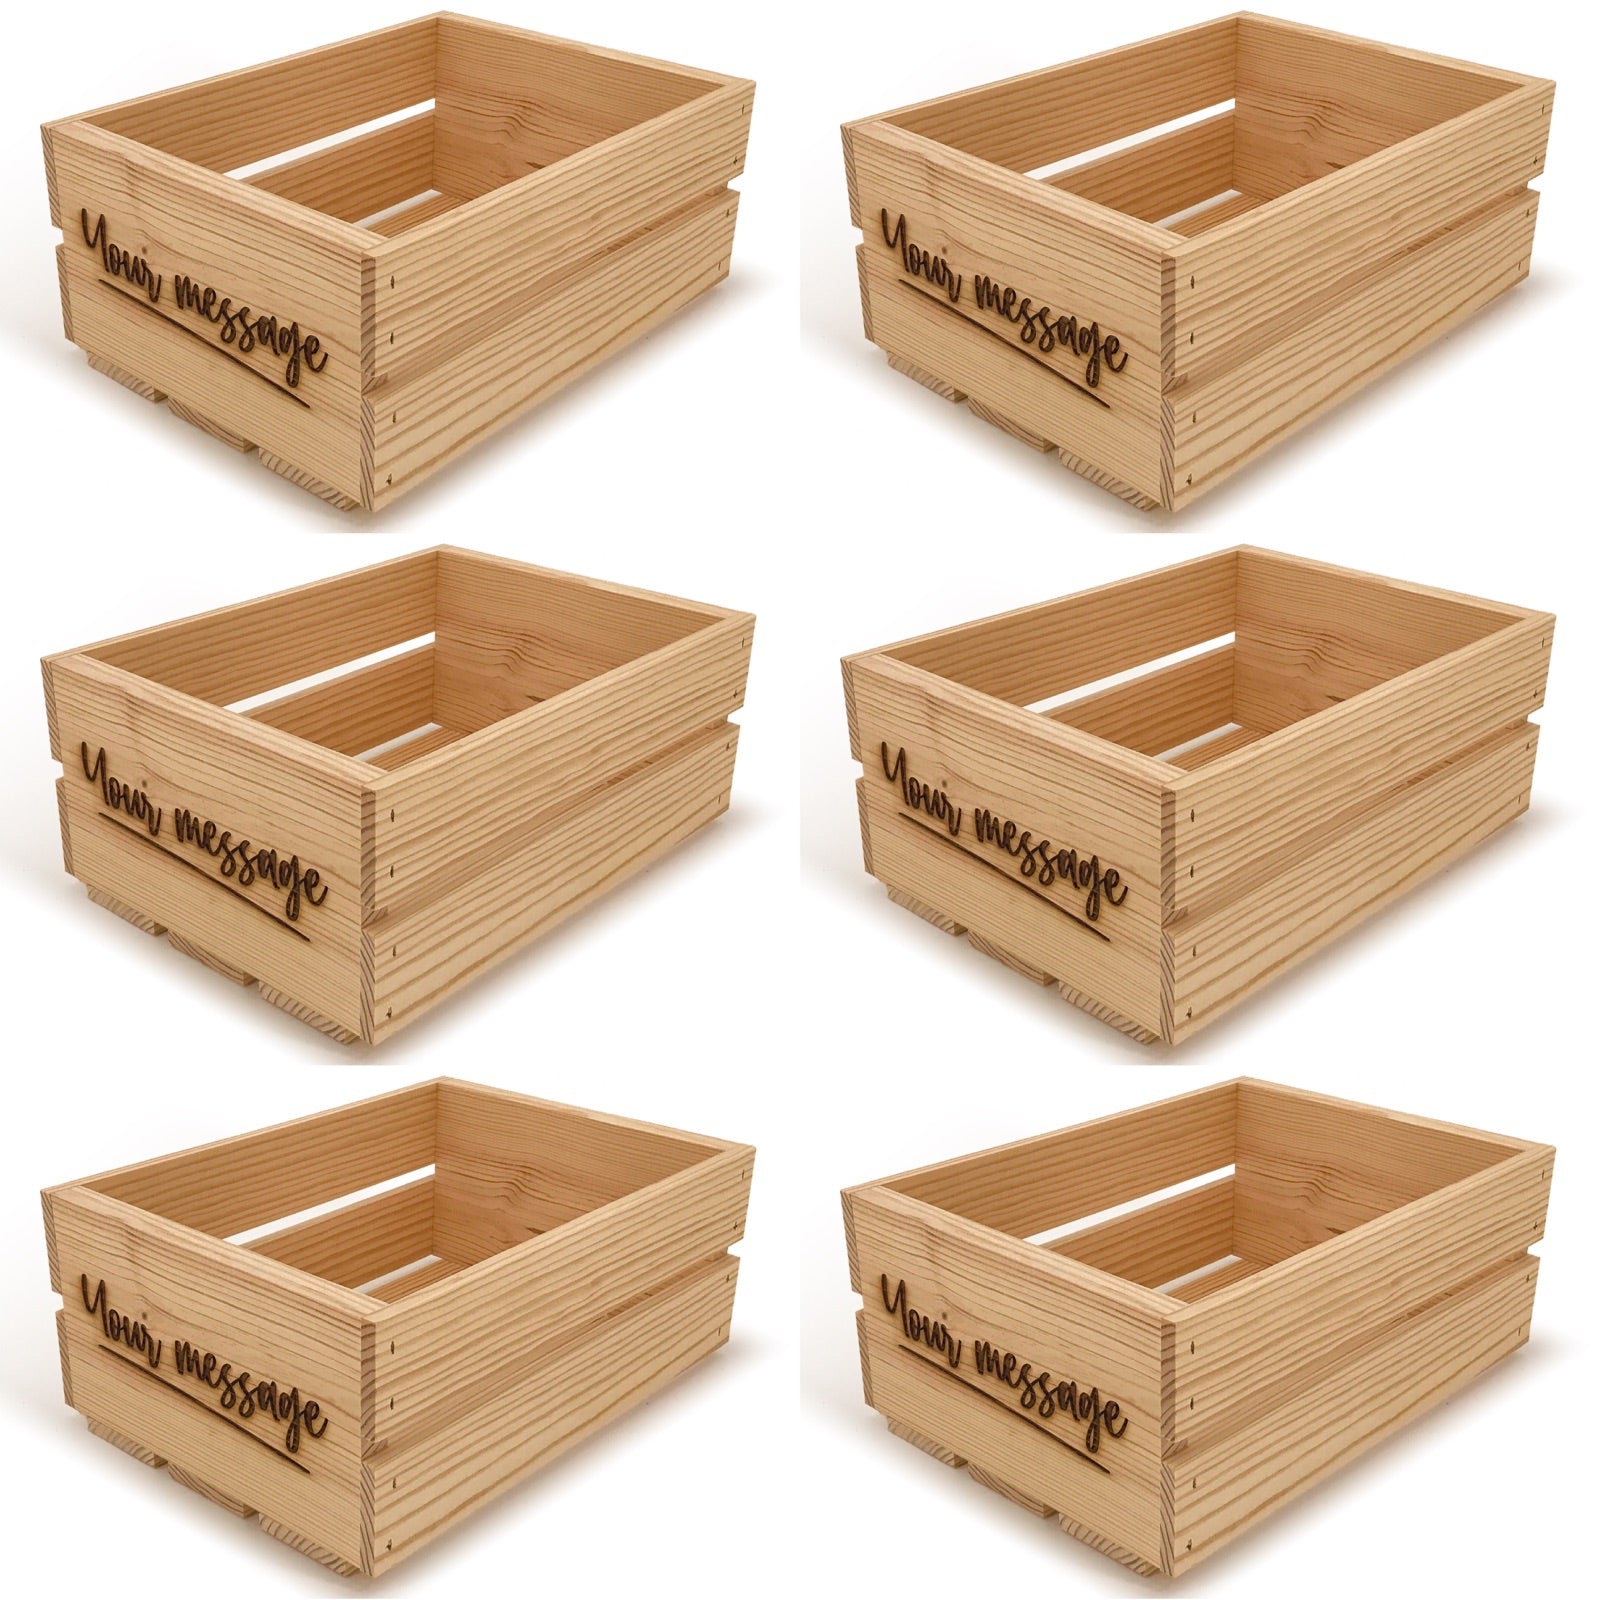 6 Small wooden crates with custom message 12x9x5.25, 6-WS-12-9-5.25-ST-NW-NL, 12-WS-12-9-5.25-ST-NW-NL, 24-WS-12-9-5.25-ST-NW-NL, 48-WS-12-9-5.25-ST-NW-NL, 96-WS-12-9-5.25-ST-NW-NL